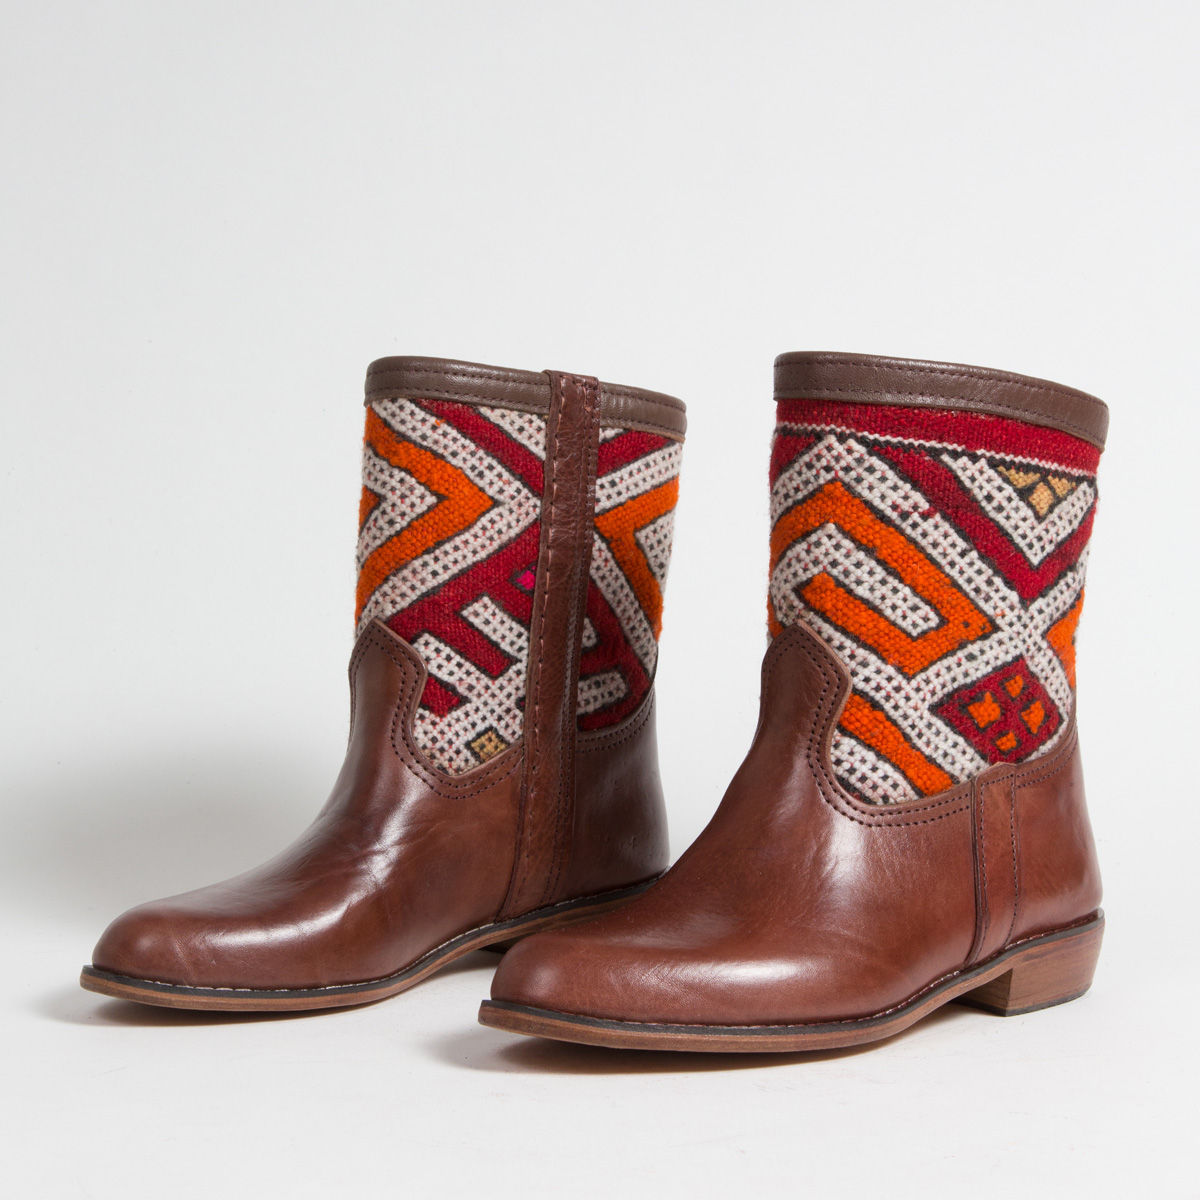 Bottines Kilim cuir mababouche artisanales (Réf. CB2-38)